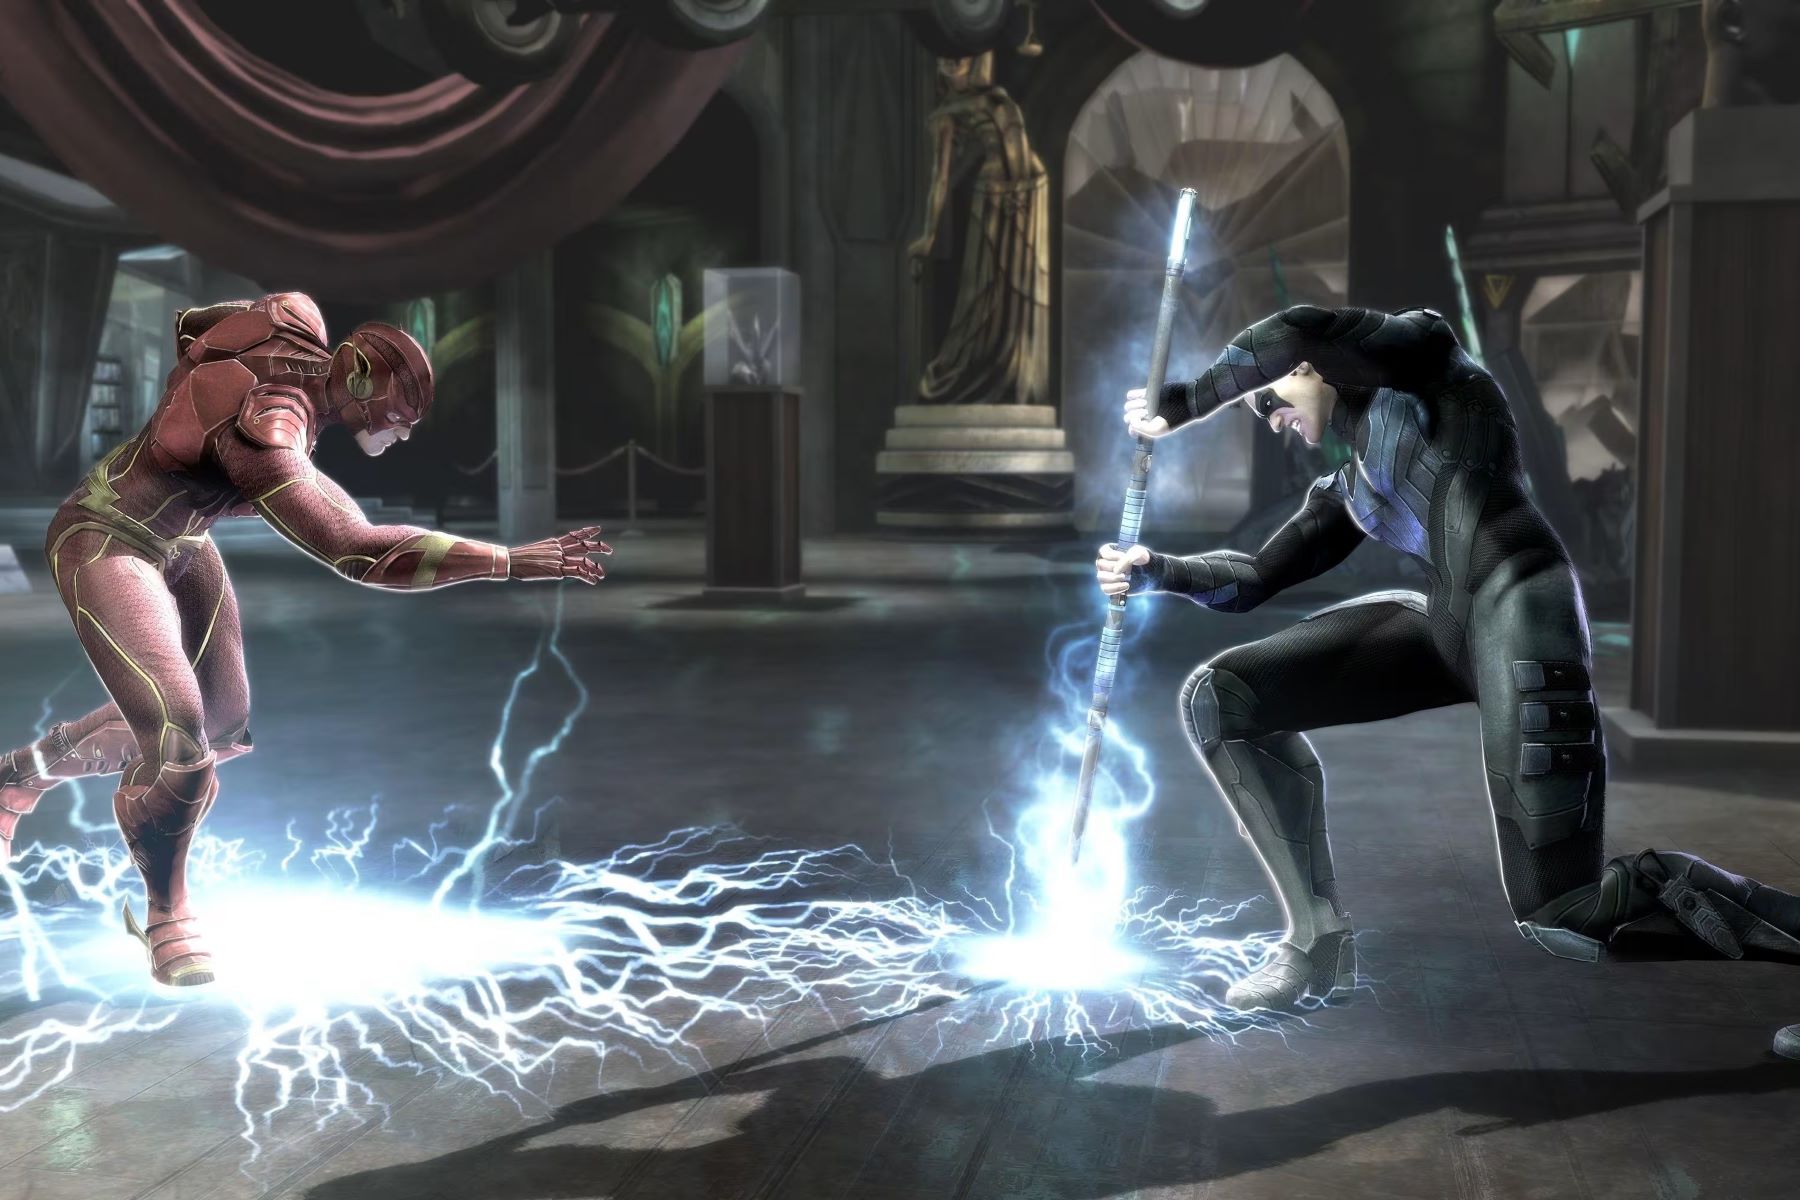 Exciting News: Injustice 3 Set To Take The Gaming World By Storm As NRS Prepares For Their Next Epic Release!